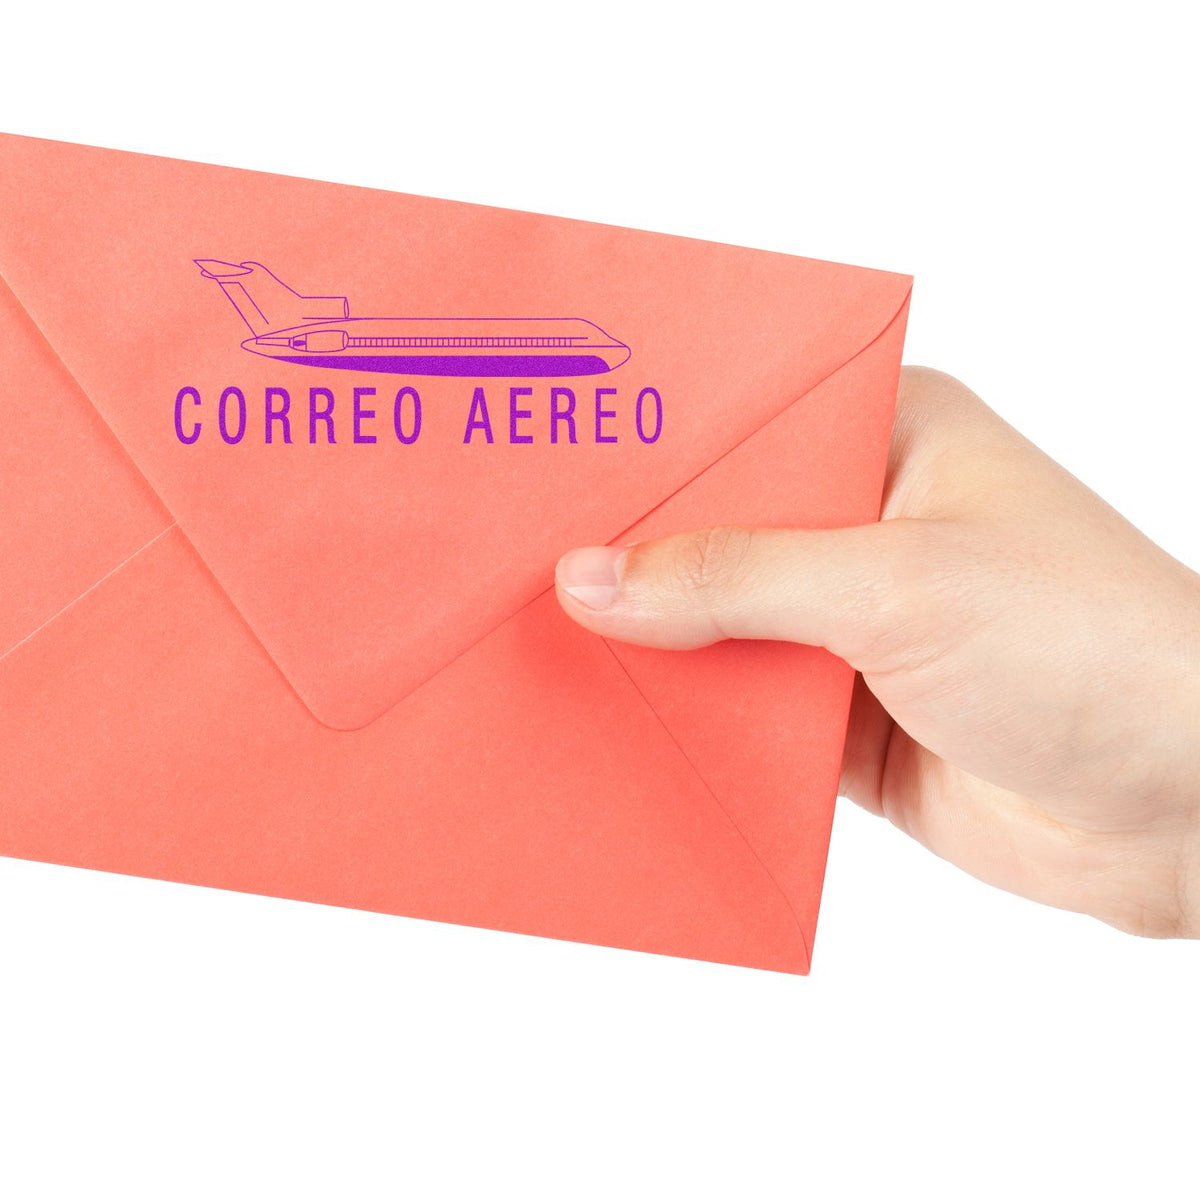 Large Correo Aero Rubber Stamp In Use